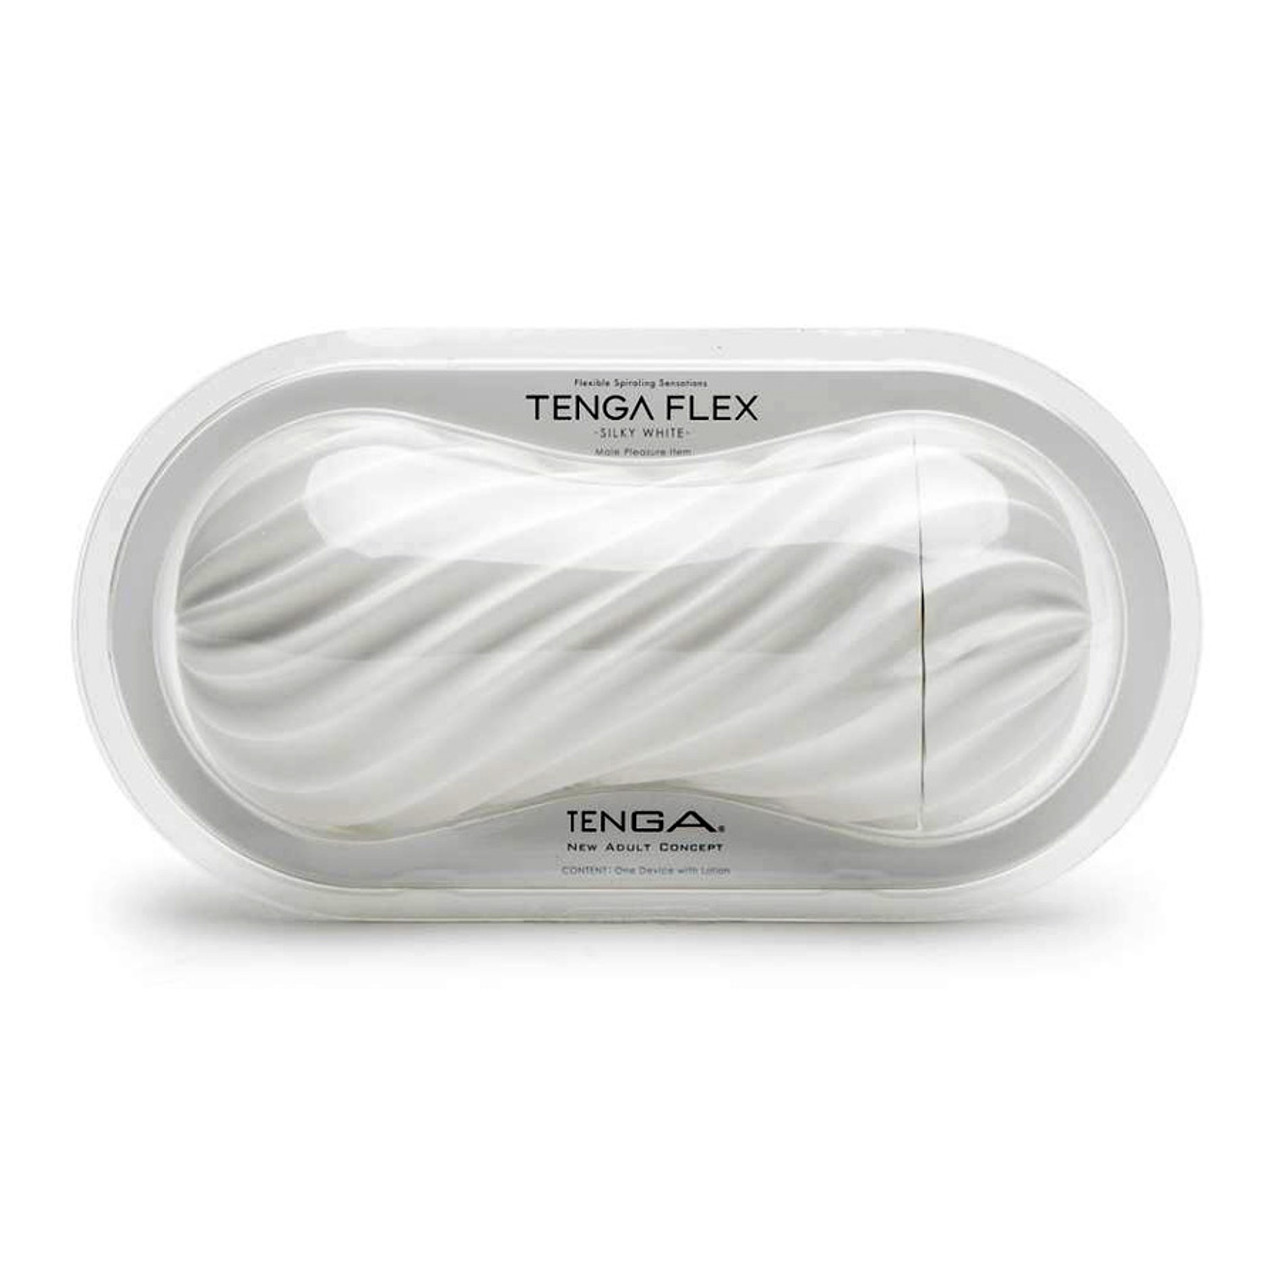 My Tenga Flex Silky White Review [Tried & Tested]